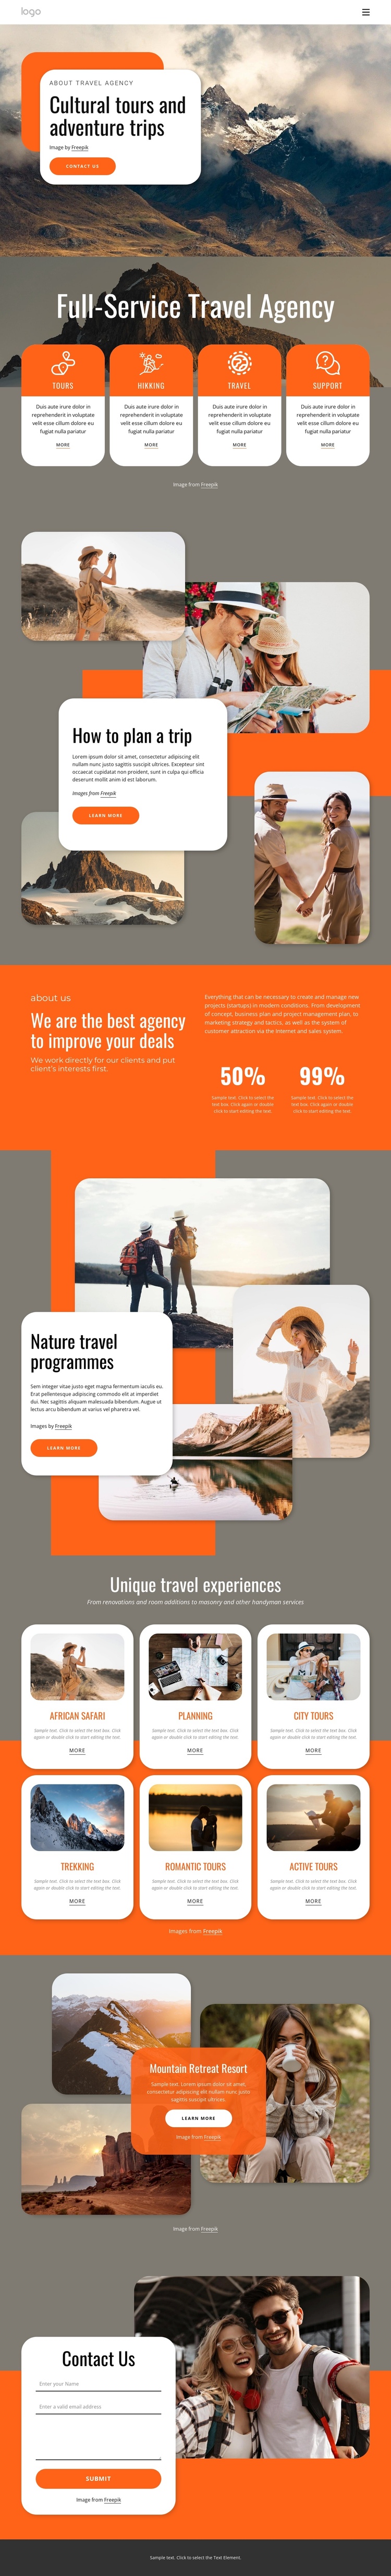 Group travel for all ages One Page Template